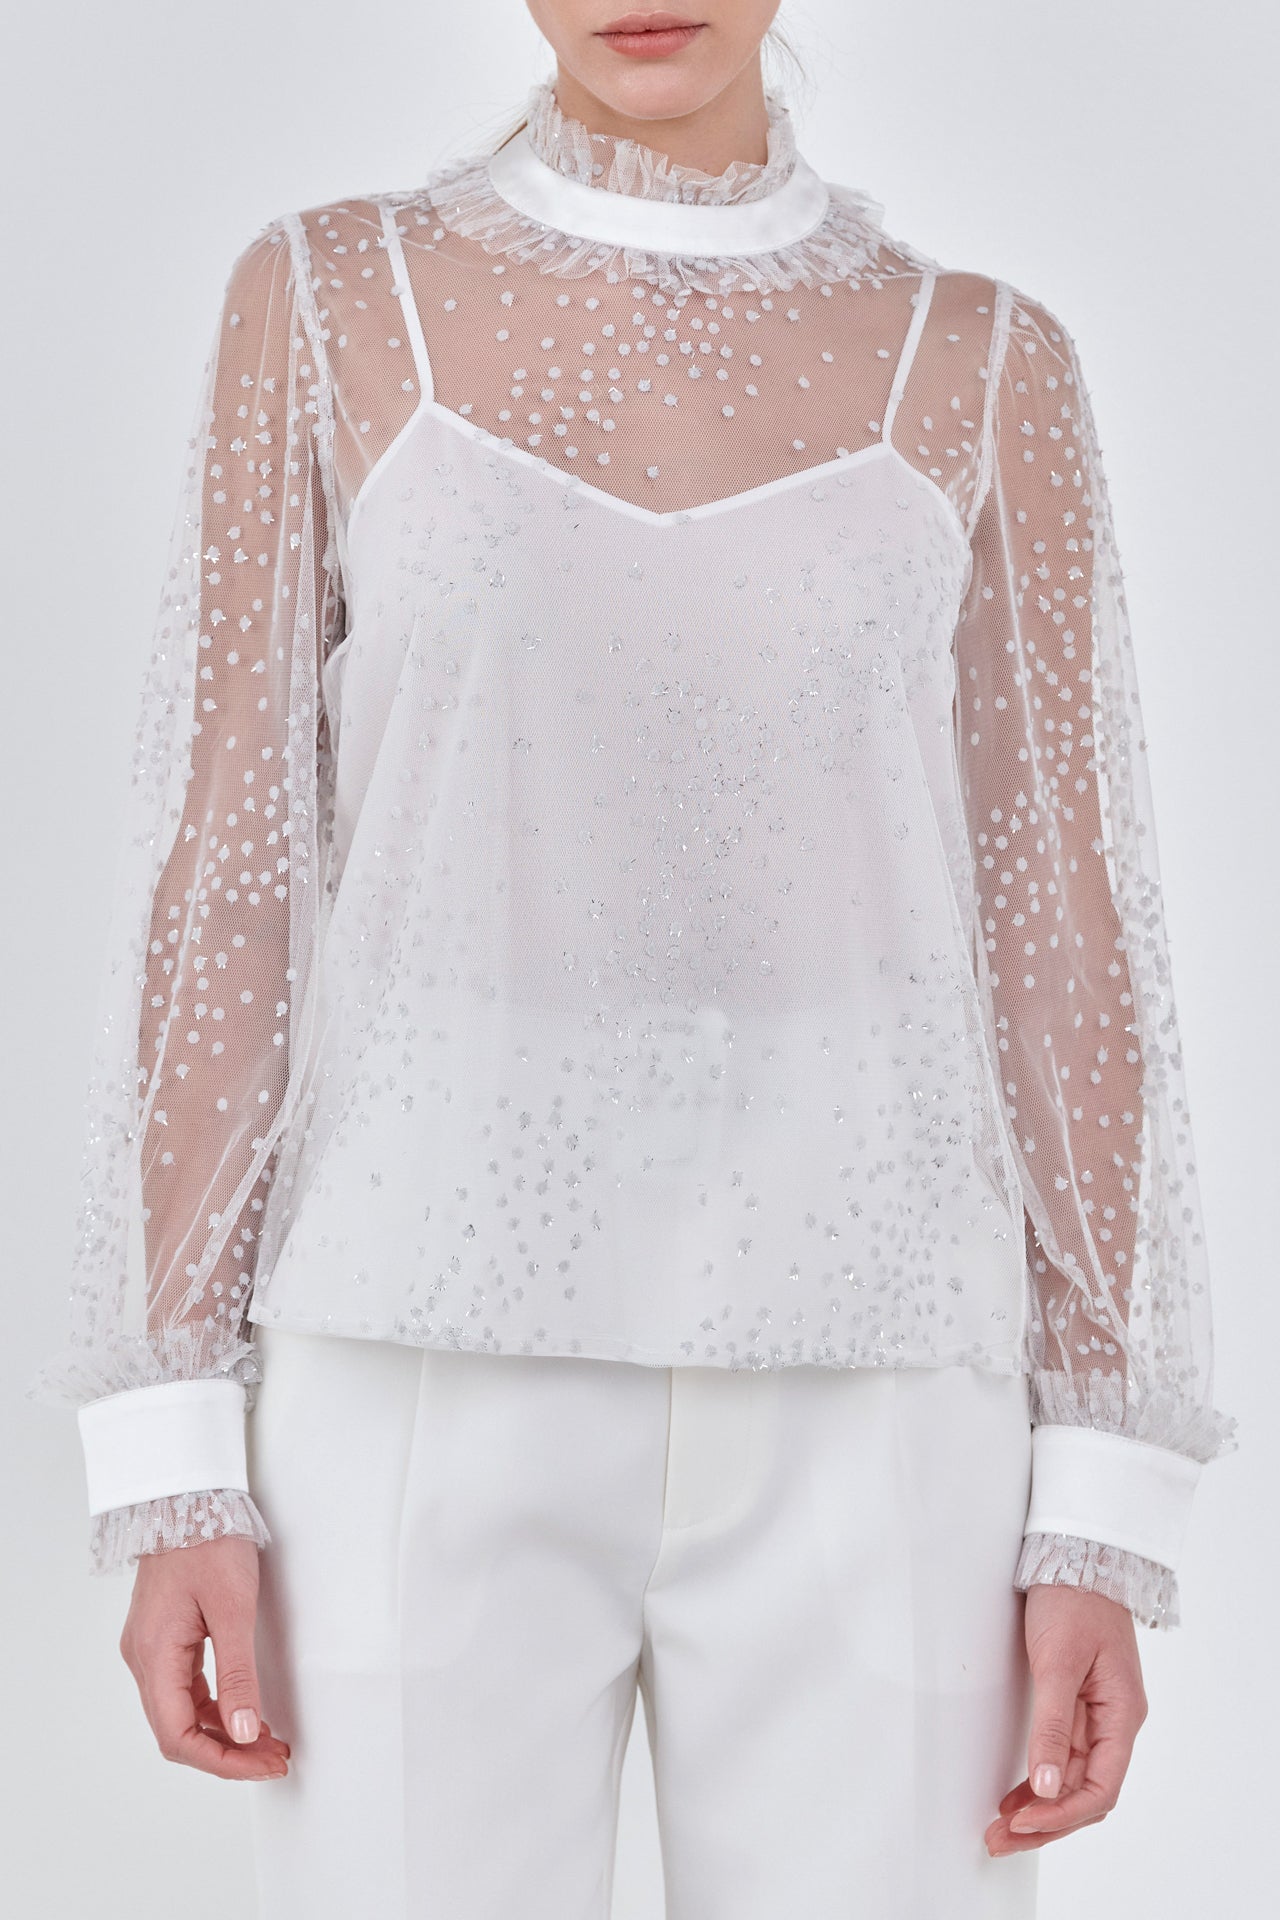 Endless Rose - Speckled Mesh Blouse - Shirts & blouses in Women's Clothing available at endlessrose.com